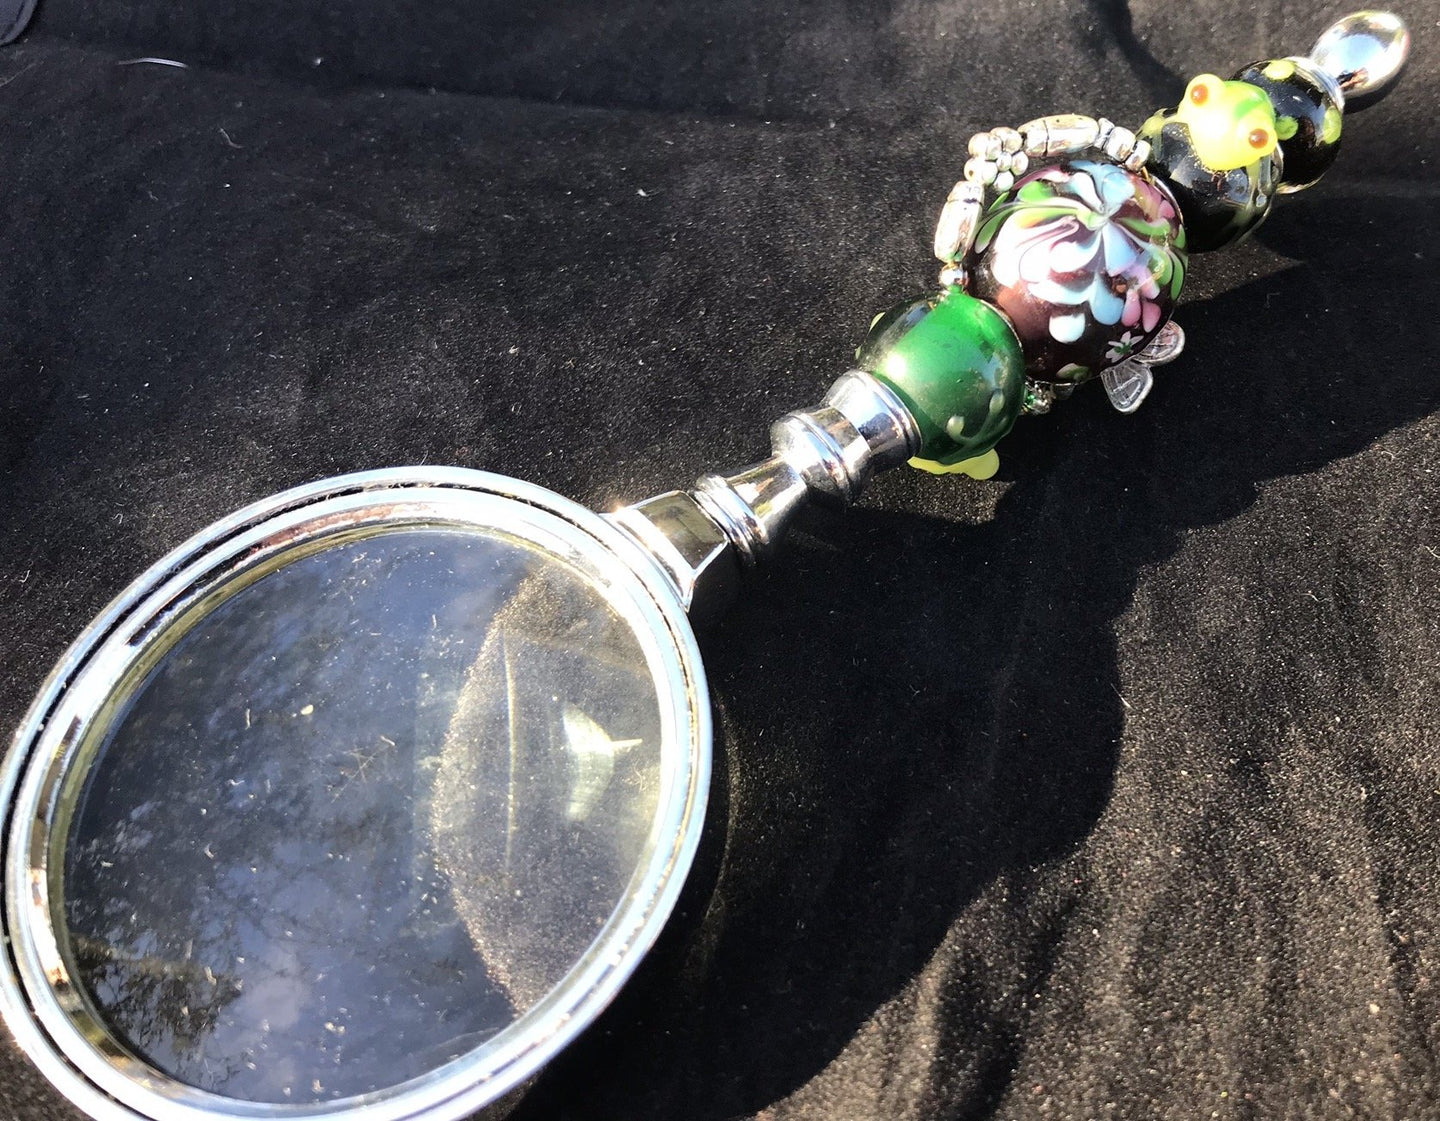 Tiny blown glass frogs appear to be climbing toward a central flowery blown glass bead, accented by viney rose charms, on the handle of this magnifying glass.